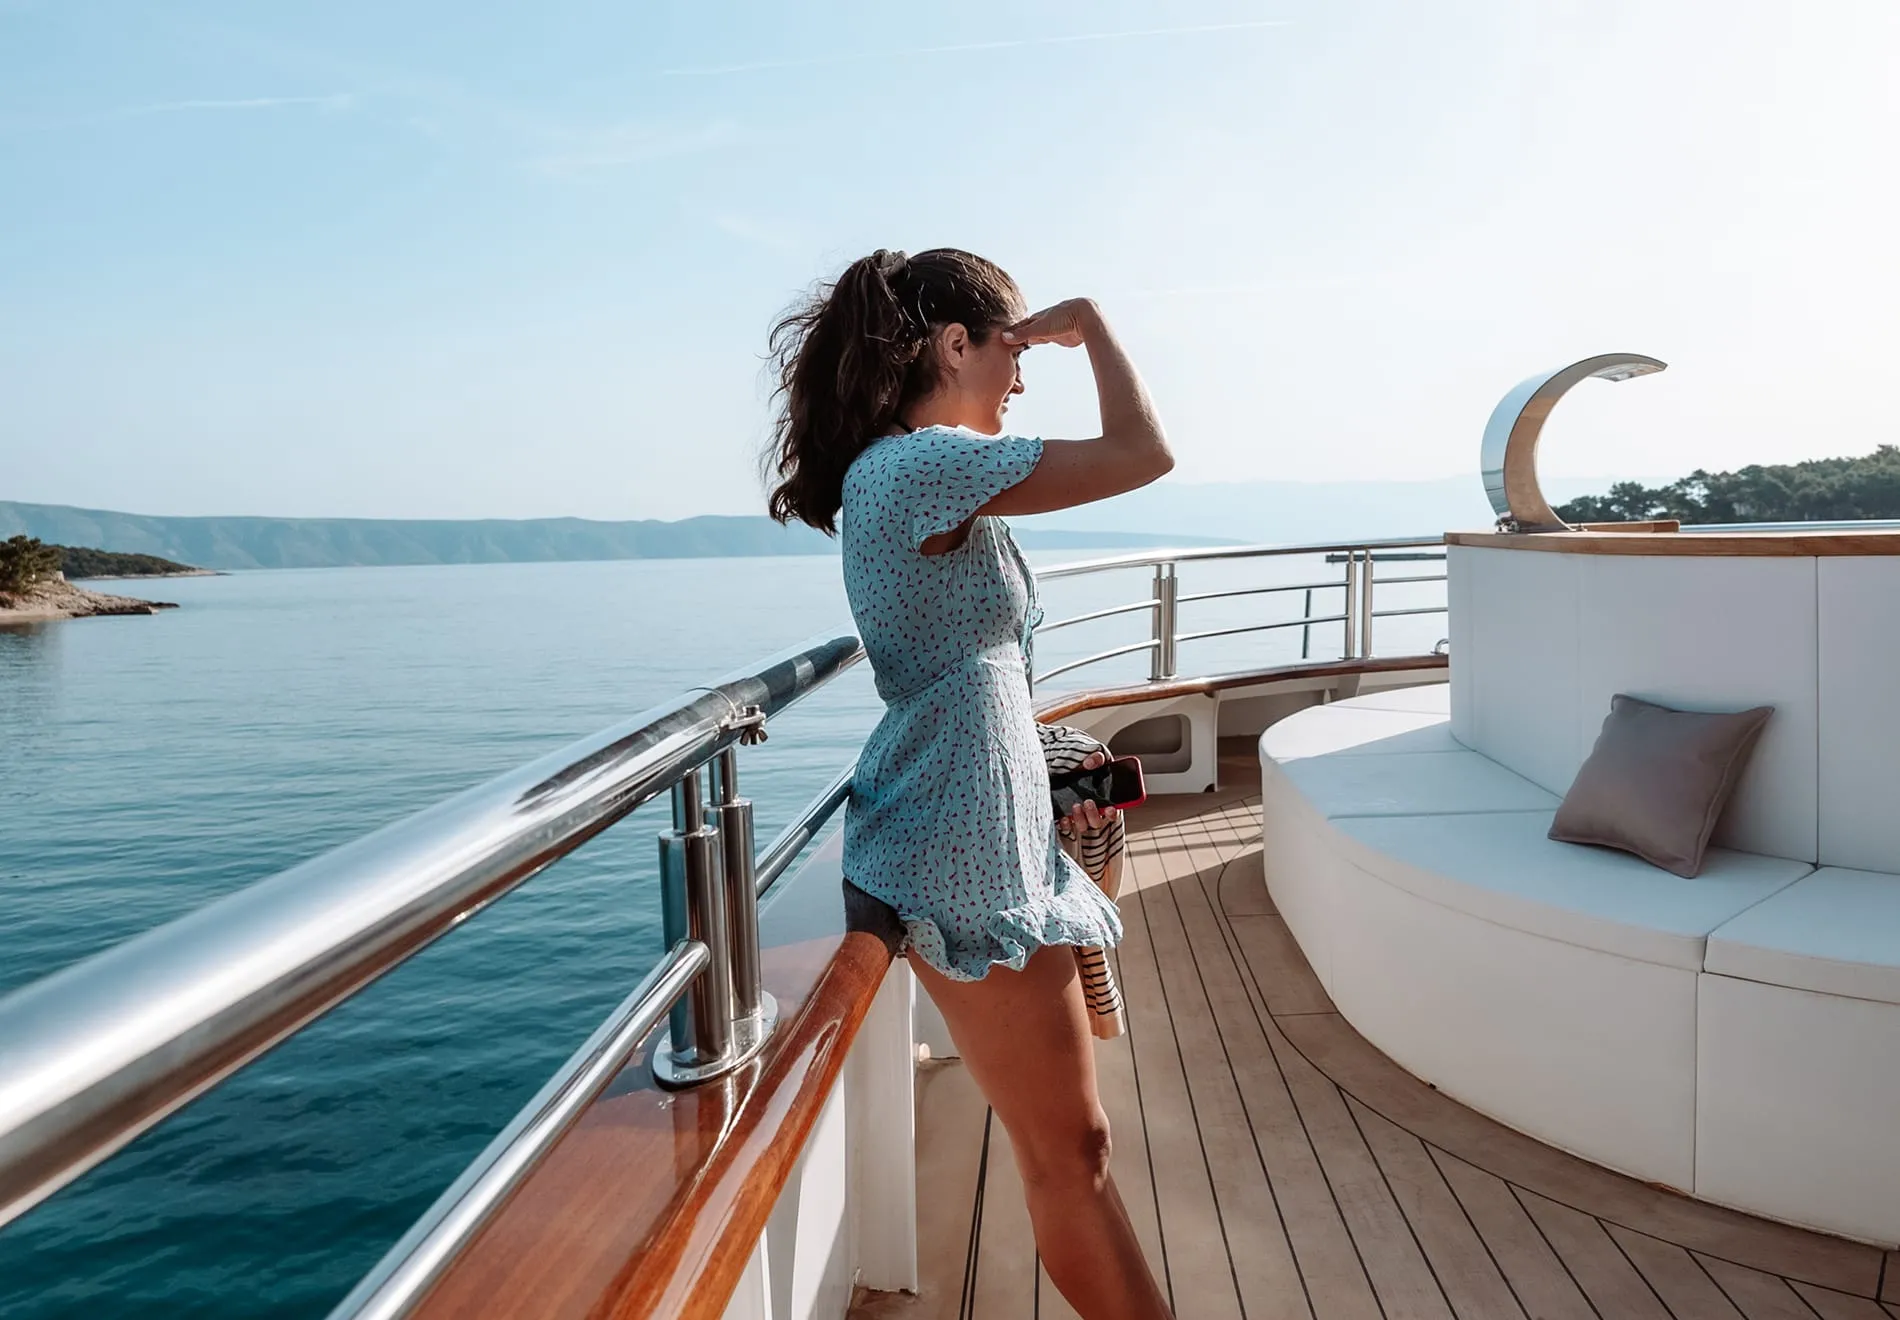 Setting the standard for private yacht charters